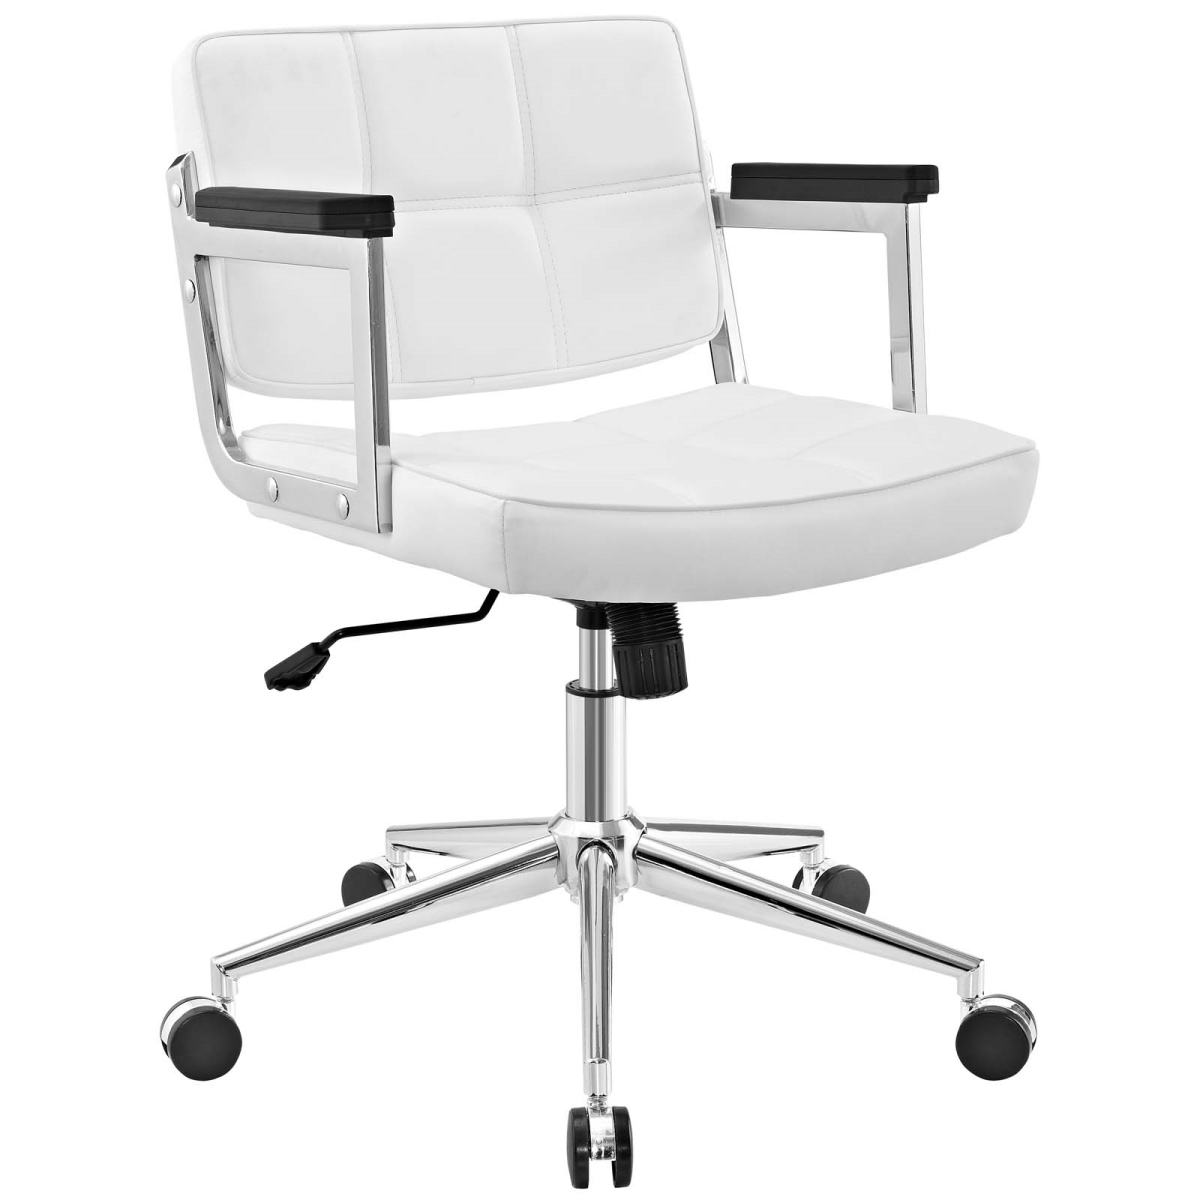 Modway Eei-2686-whi 37 - 39.5 H X 26 W X 25 L In. Portray Mid Back Upholstered Vinyl Office Chair, White